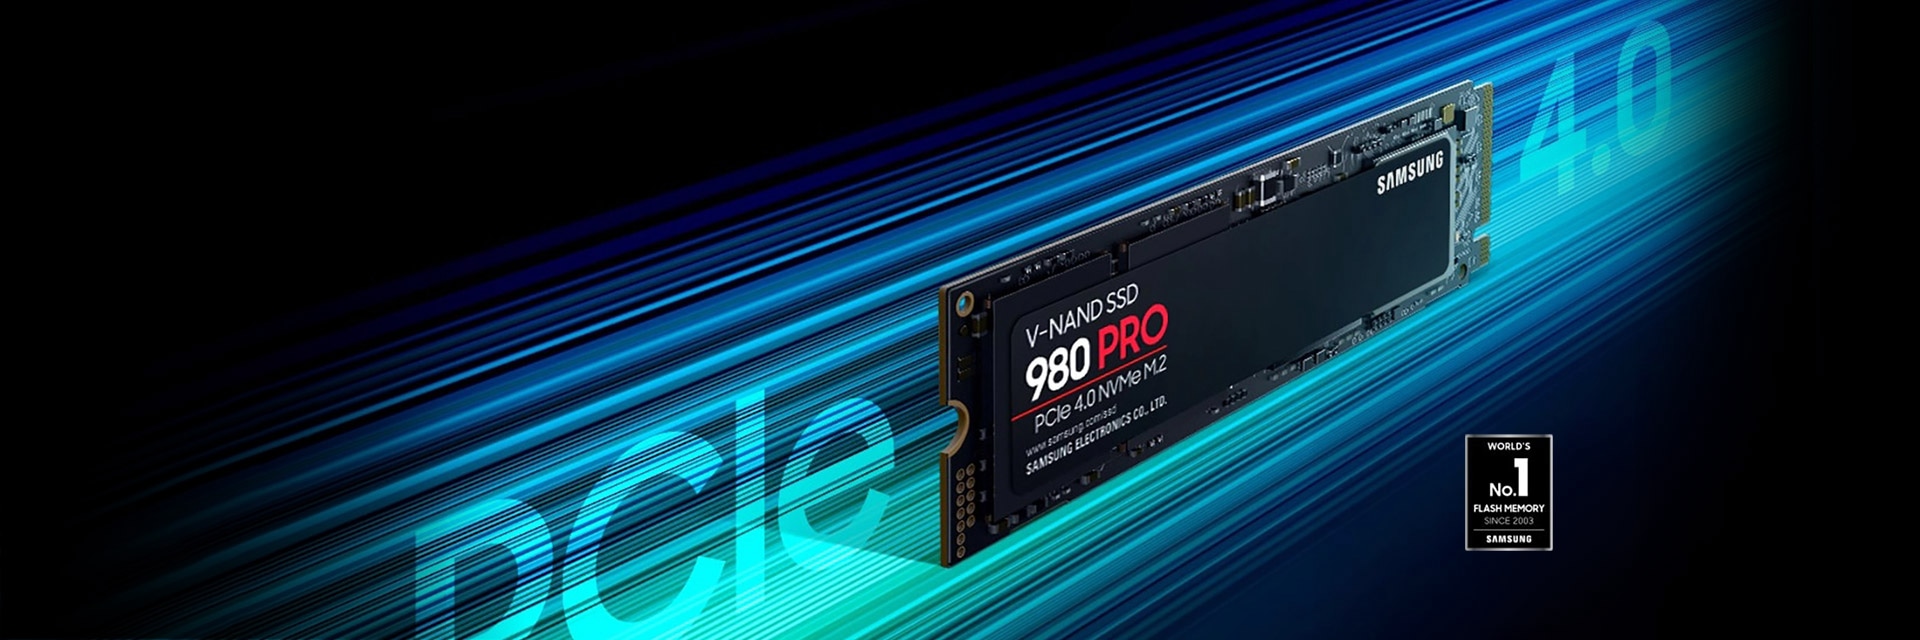 react Prominent sunlight Samsung 980 PRO NVMe M.2 SSD | Samsung Semiconductor Global